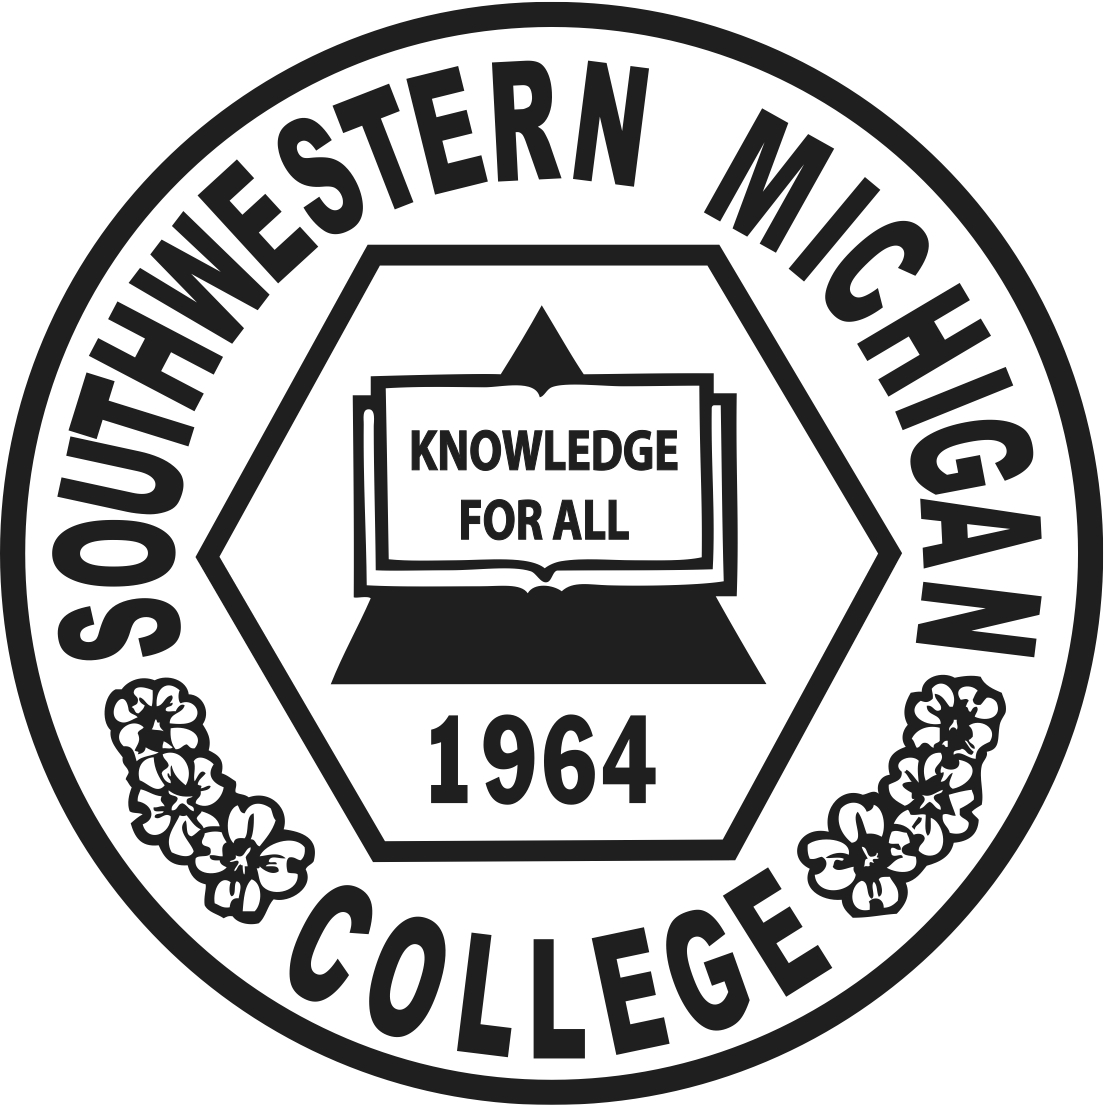 The official college seal